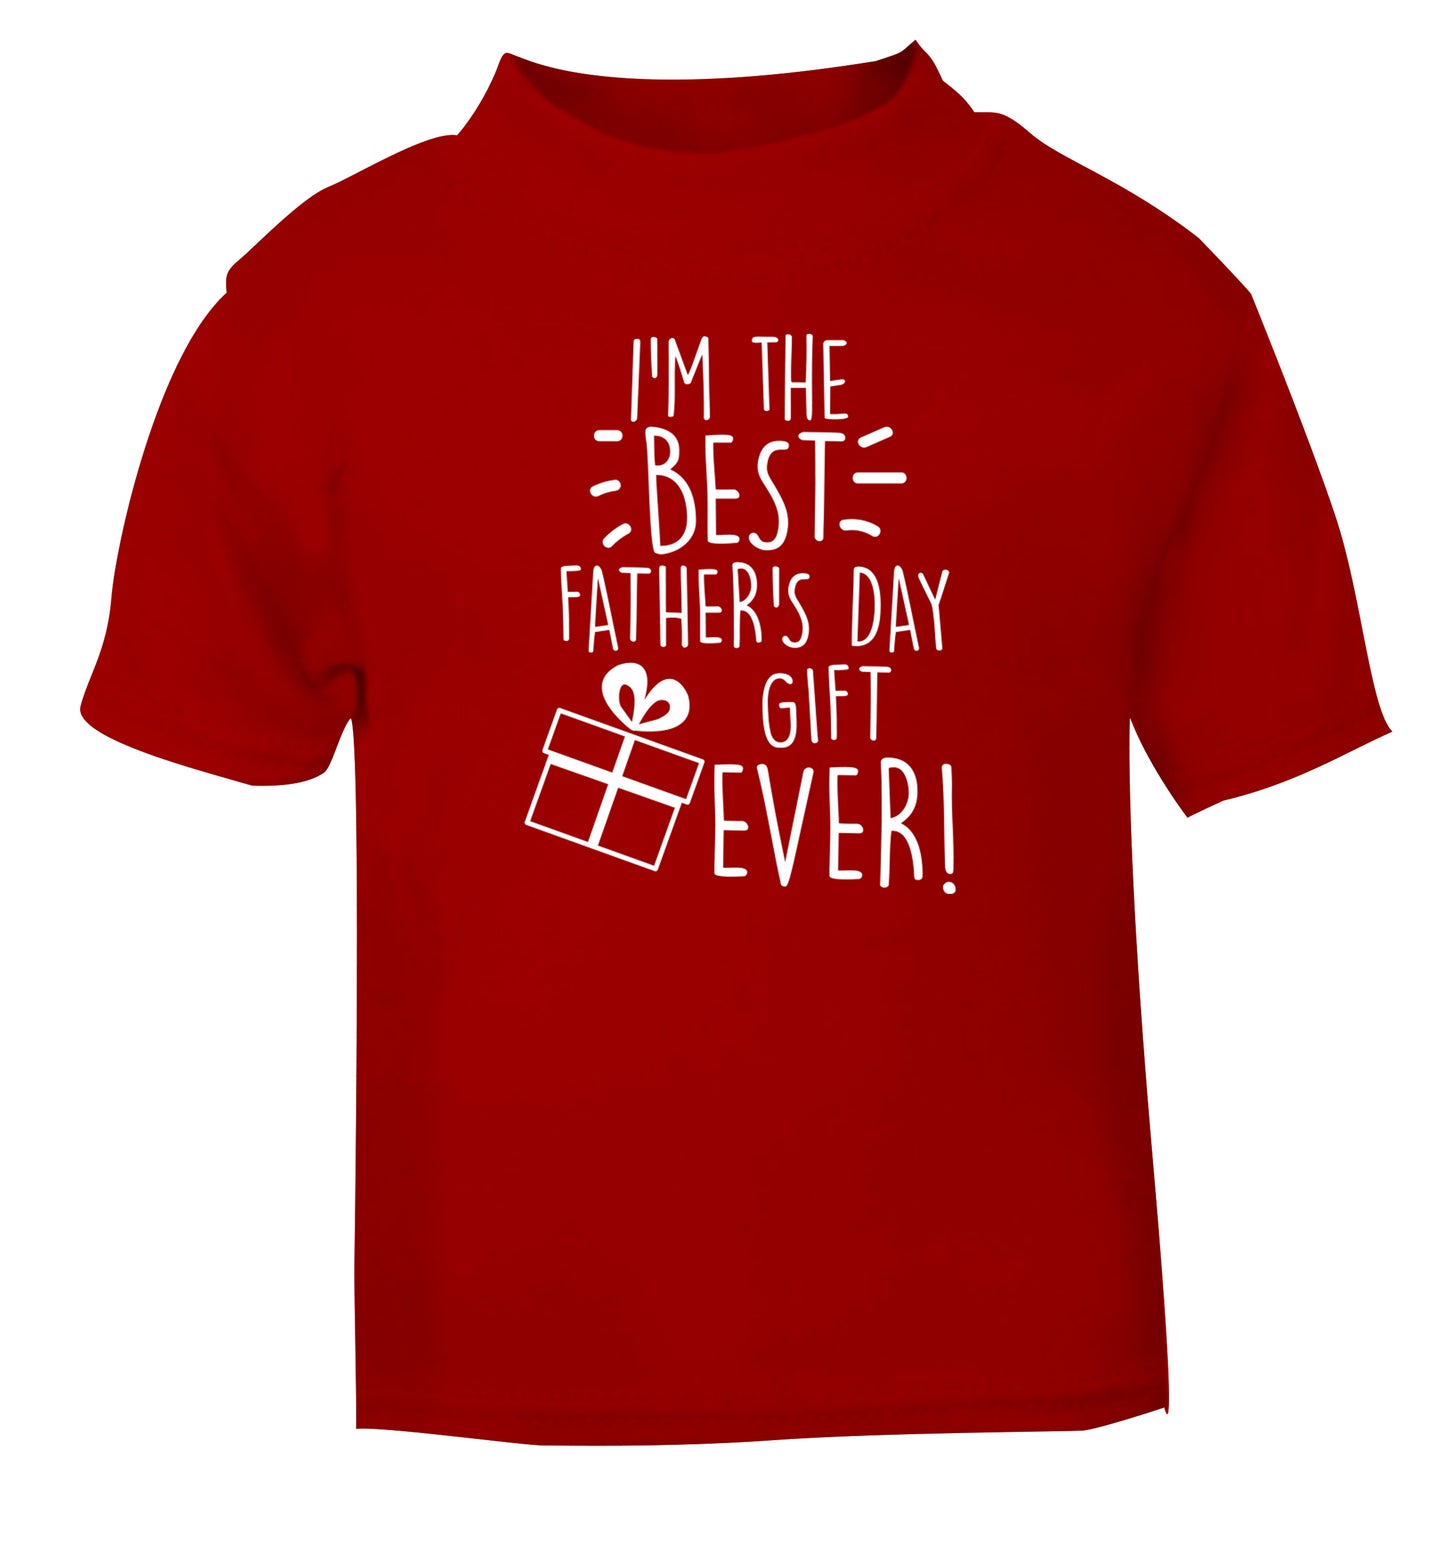 I'm the BEST father's day gift ever! red Baby Toddler Tshirt 2 Years